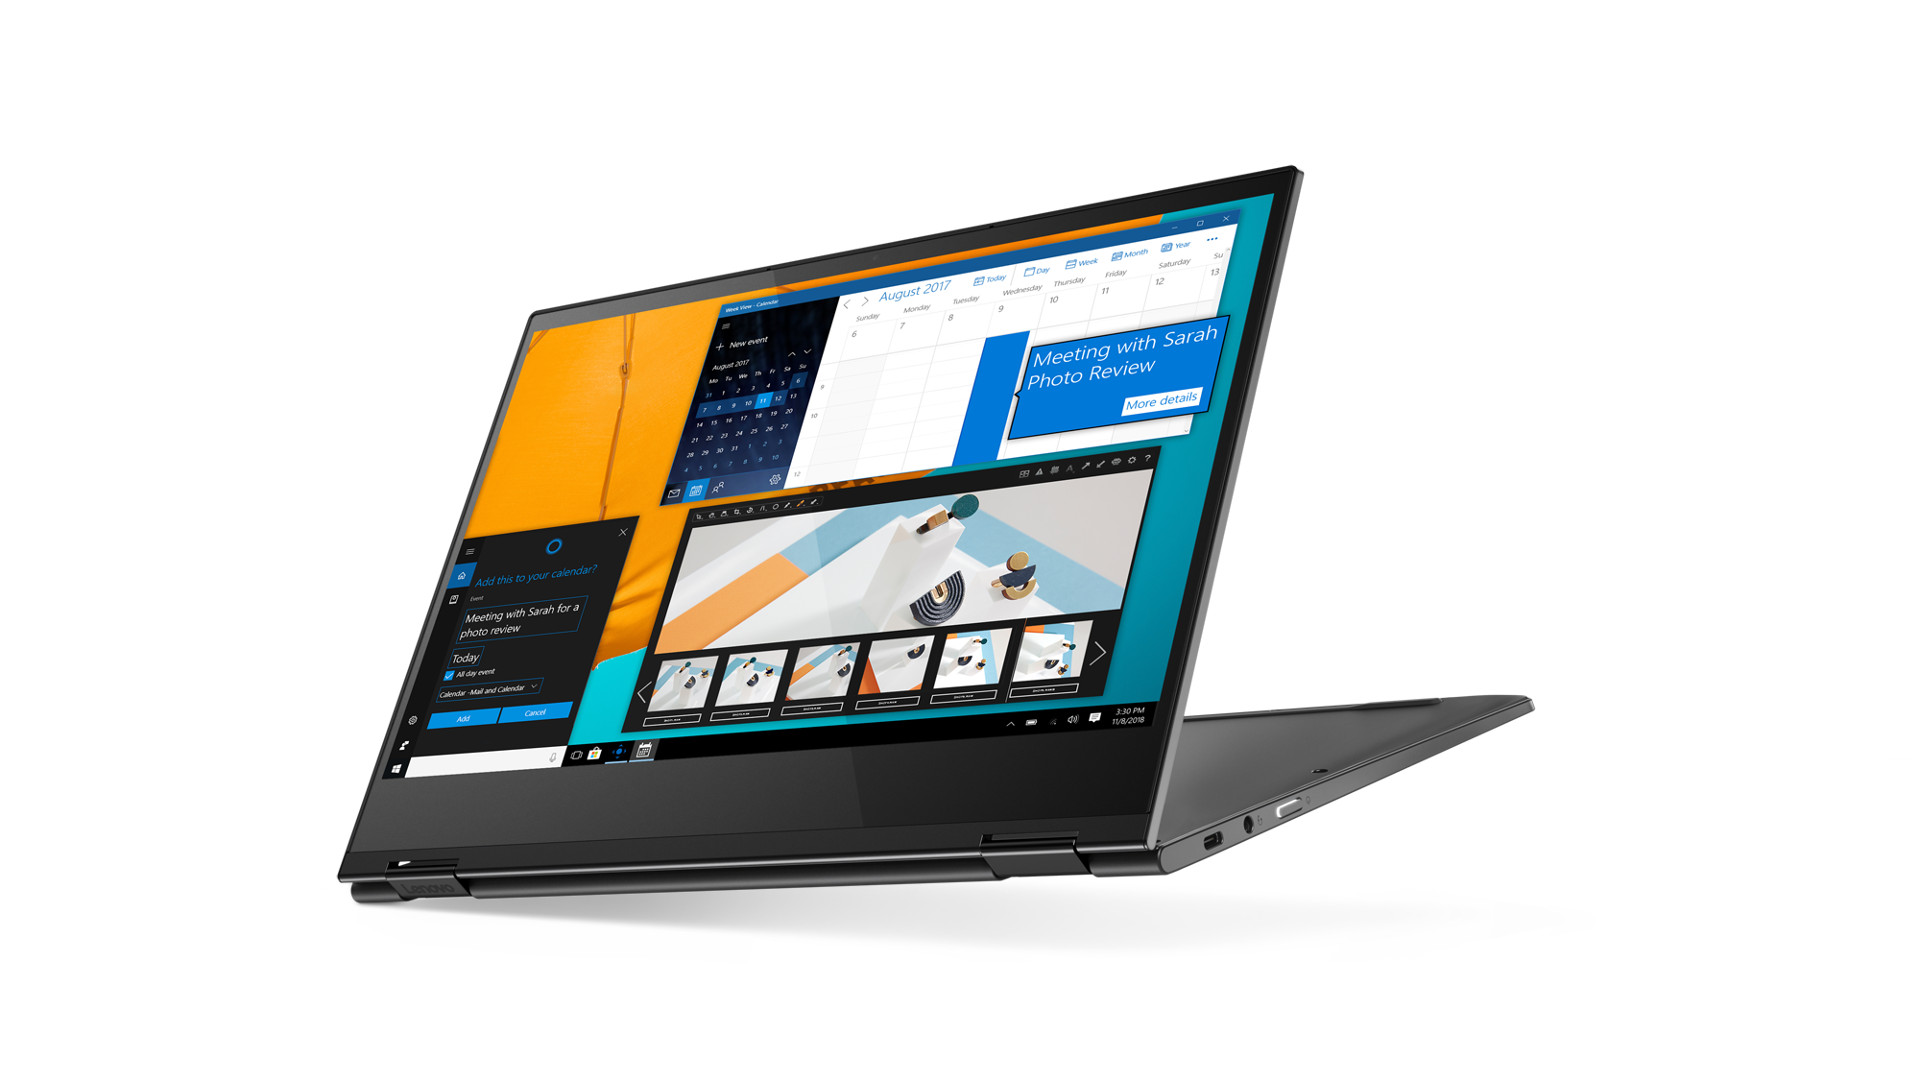 The Lenovo Yoga C630 with its screen folded back.